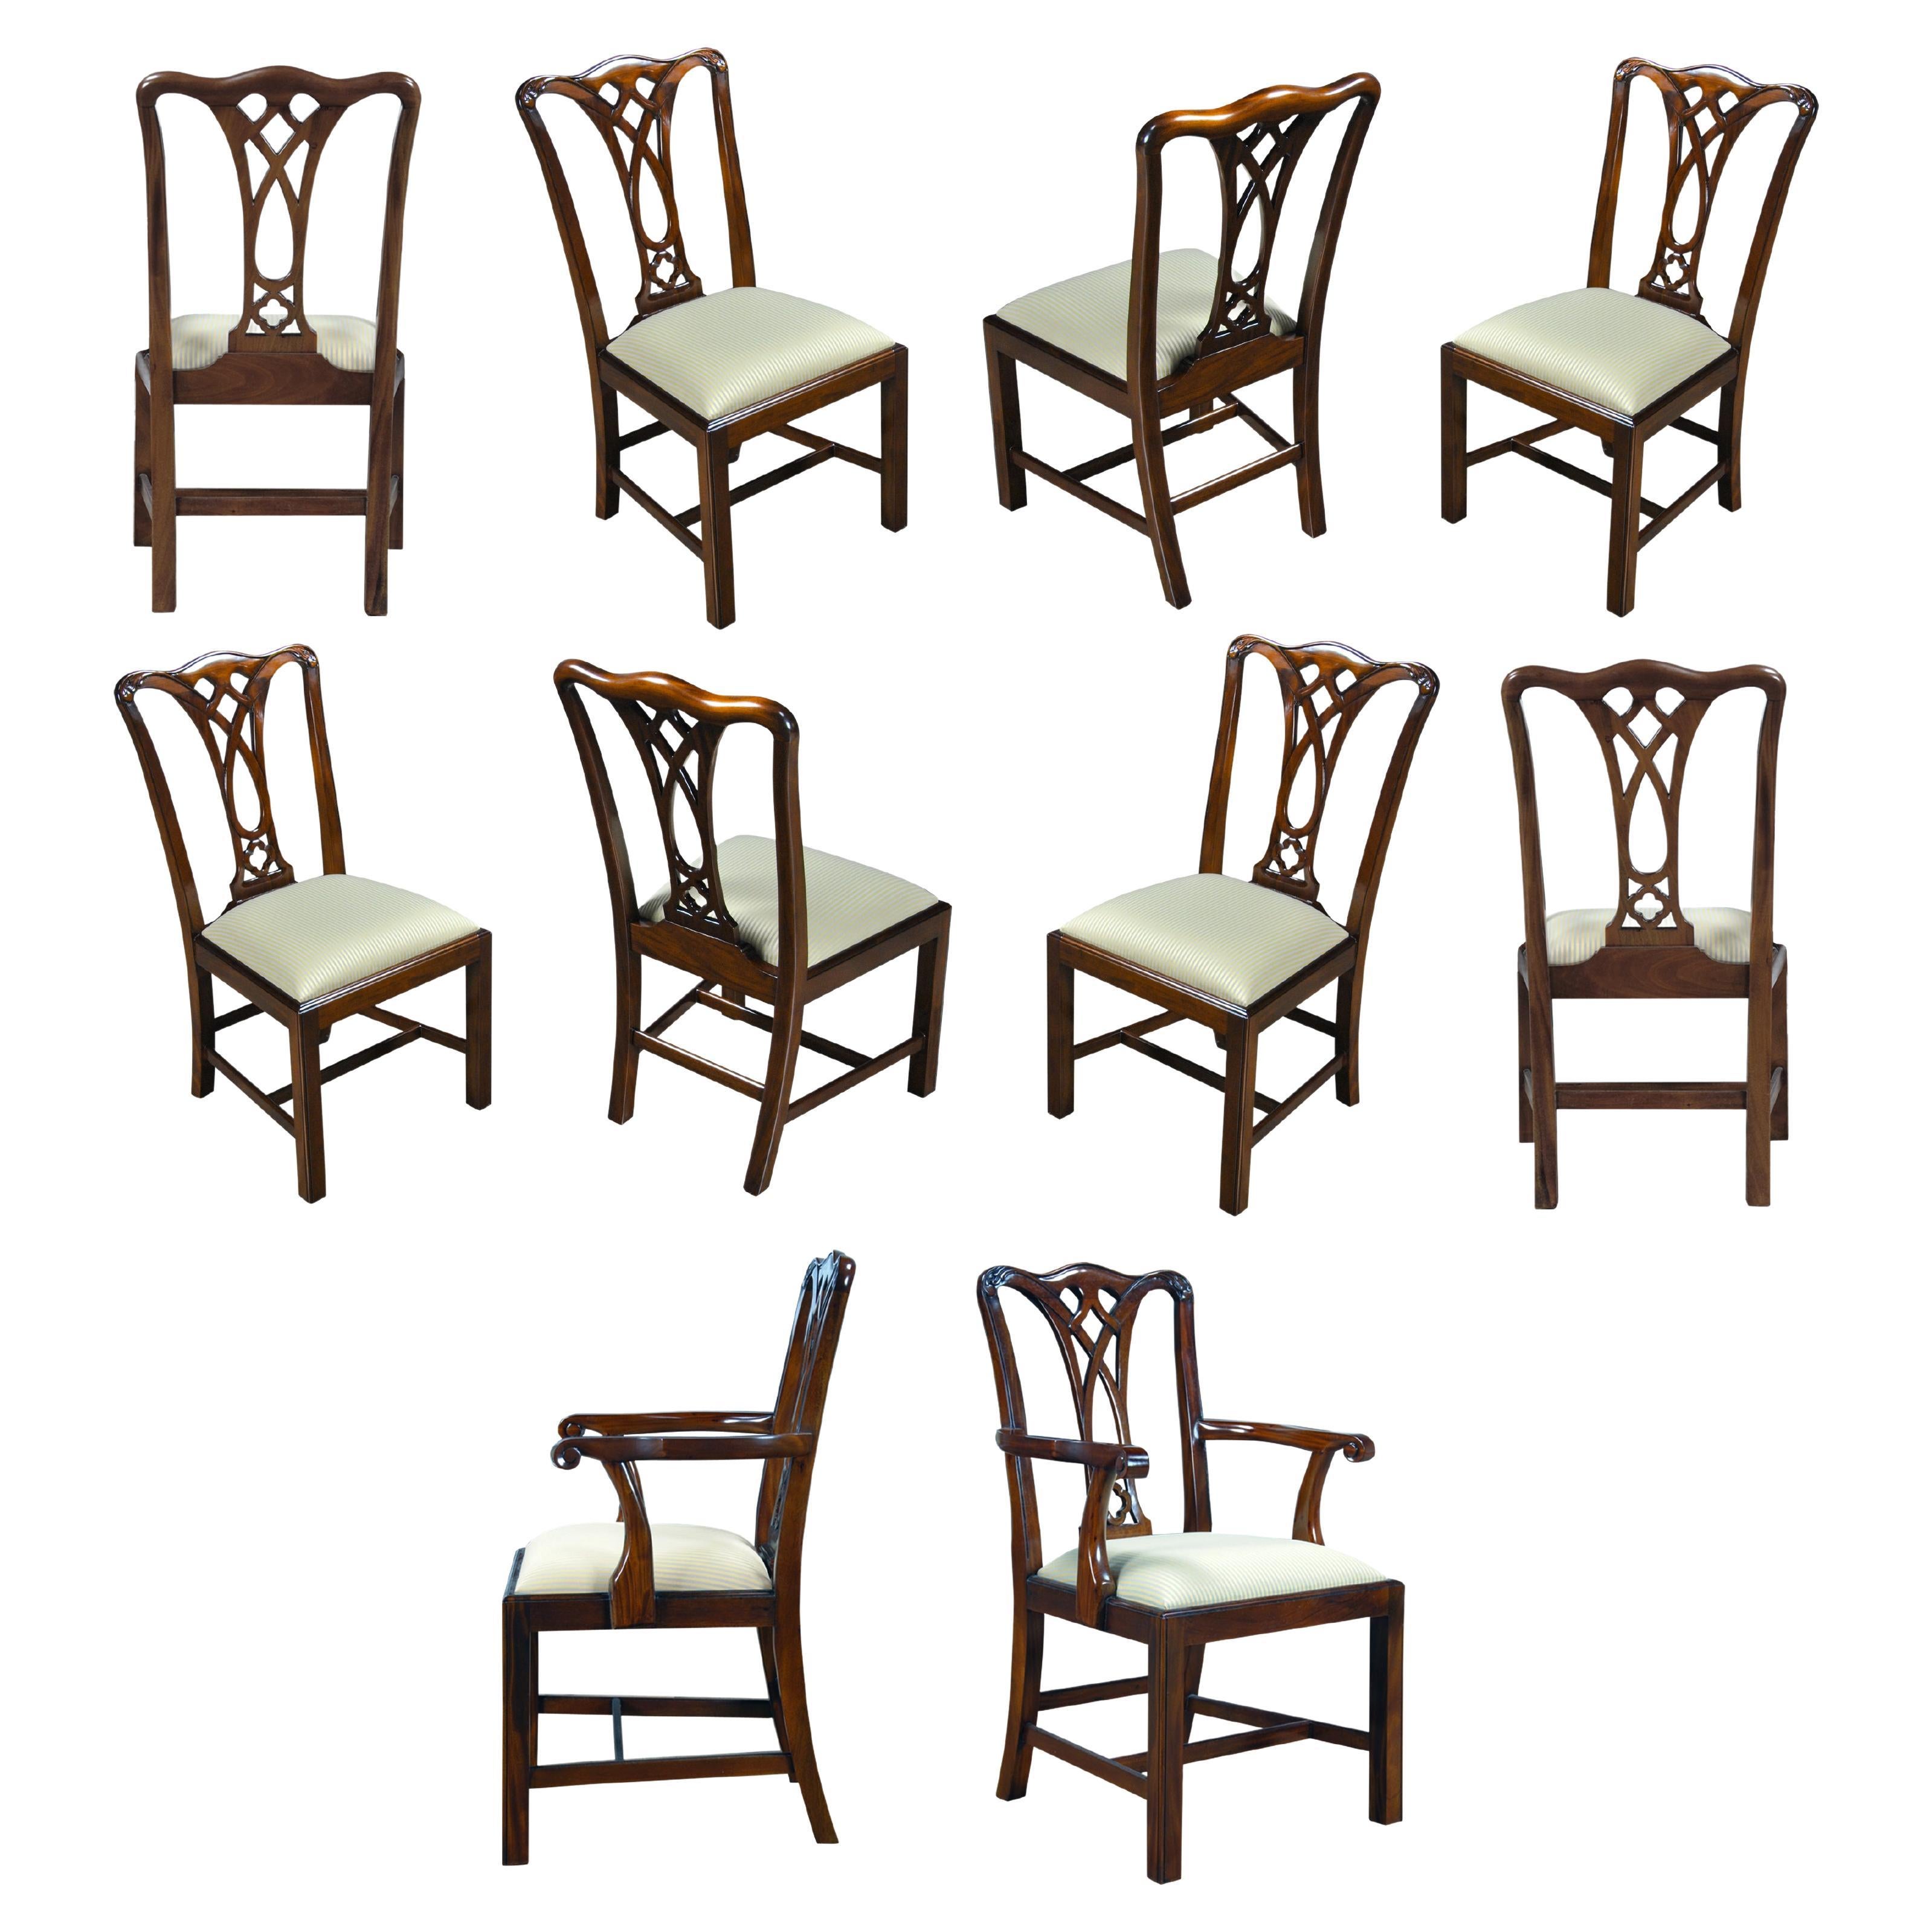 Country Chippendale Chairs, Set of 10